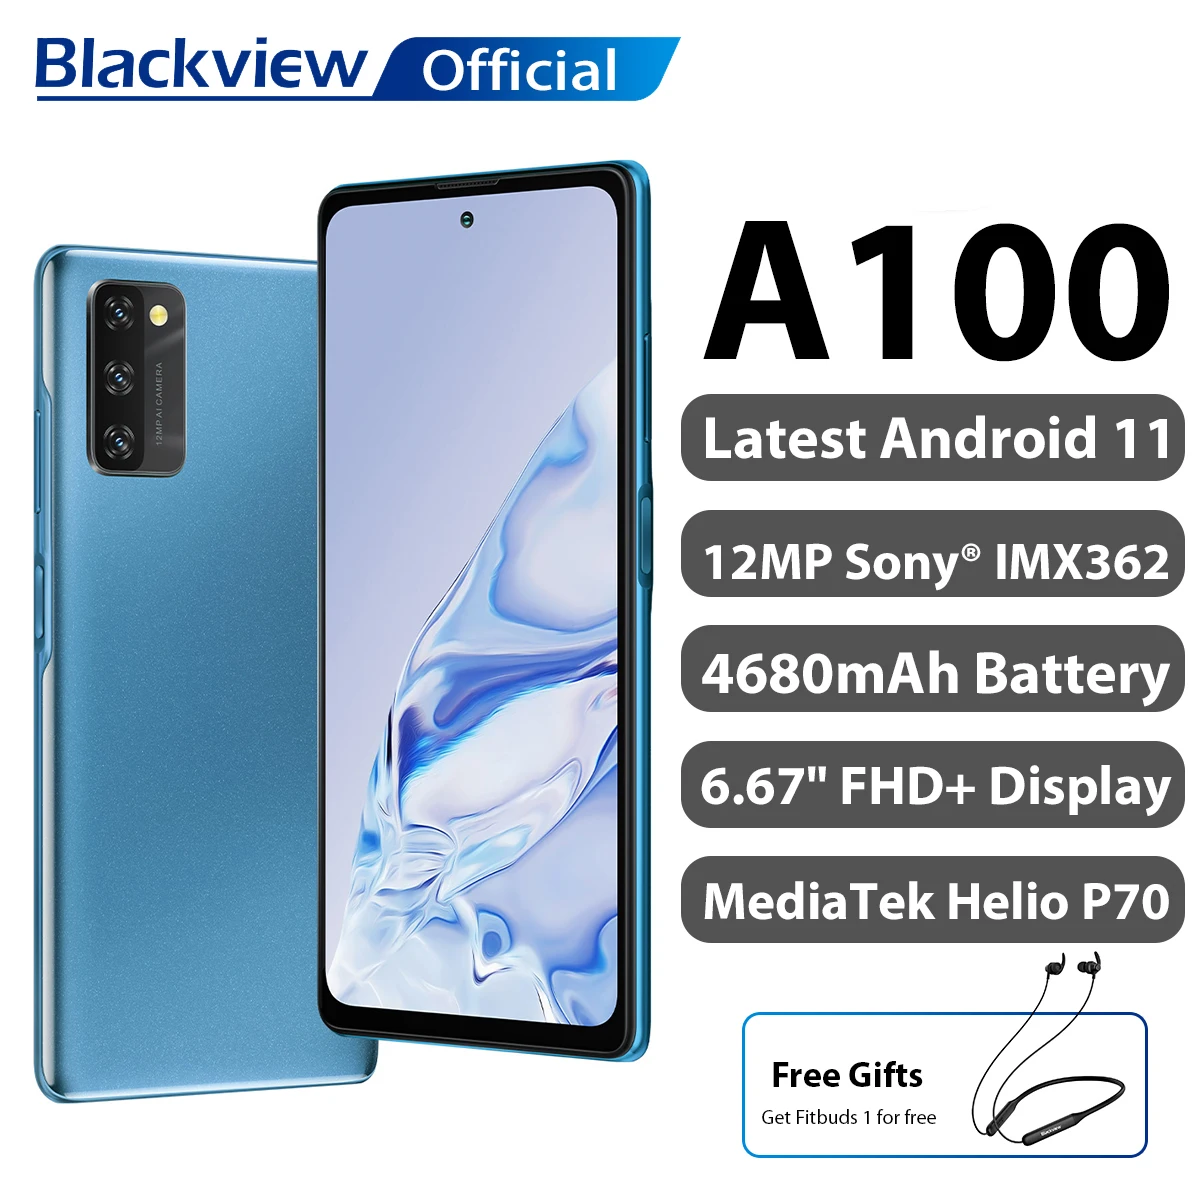 Blackview A100 Helio P70 Android 11 Smartphone 6GB+128GB 6.67 4680mAh Cellphone NFC Cellura 4G LTE Mobile Phone